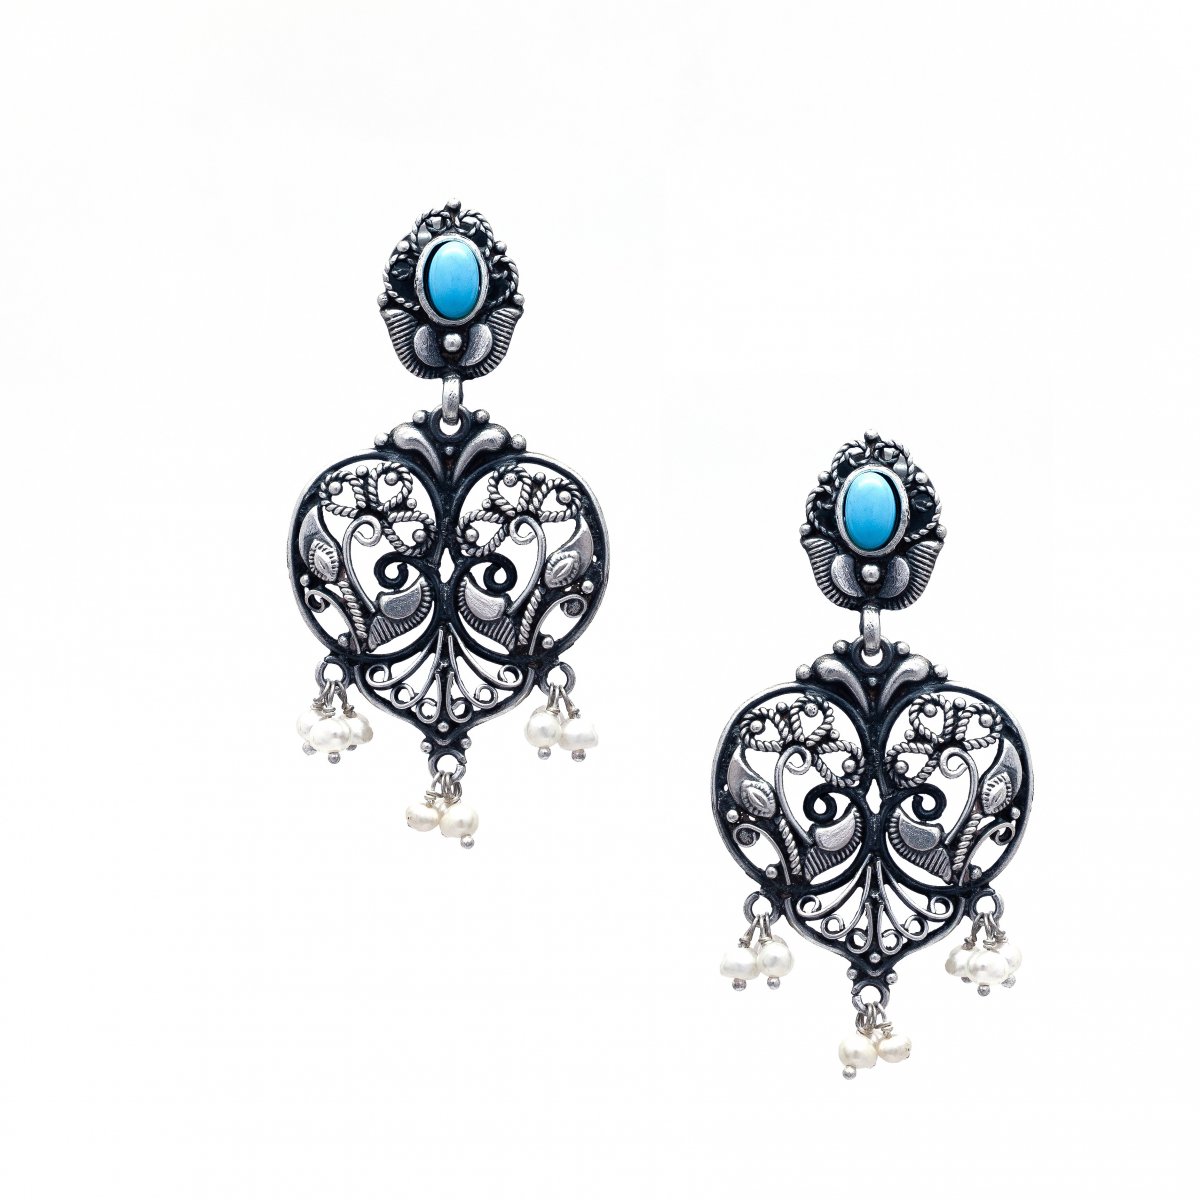 92.5 SILVER OXIDIZED TRADITIONAL EARRINGS FOR WOMEN AND GIRLS 